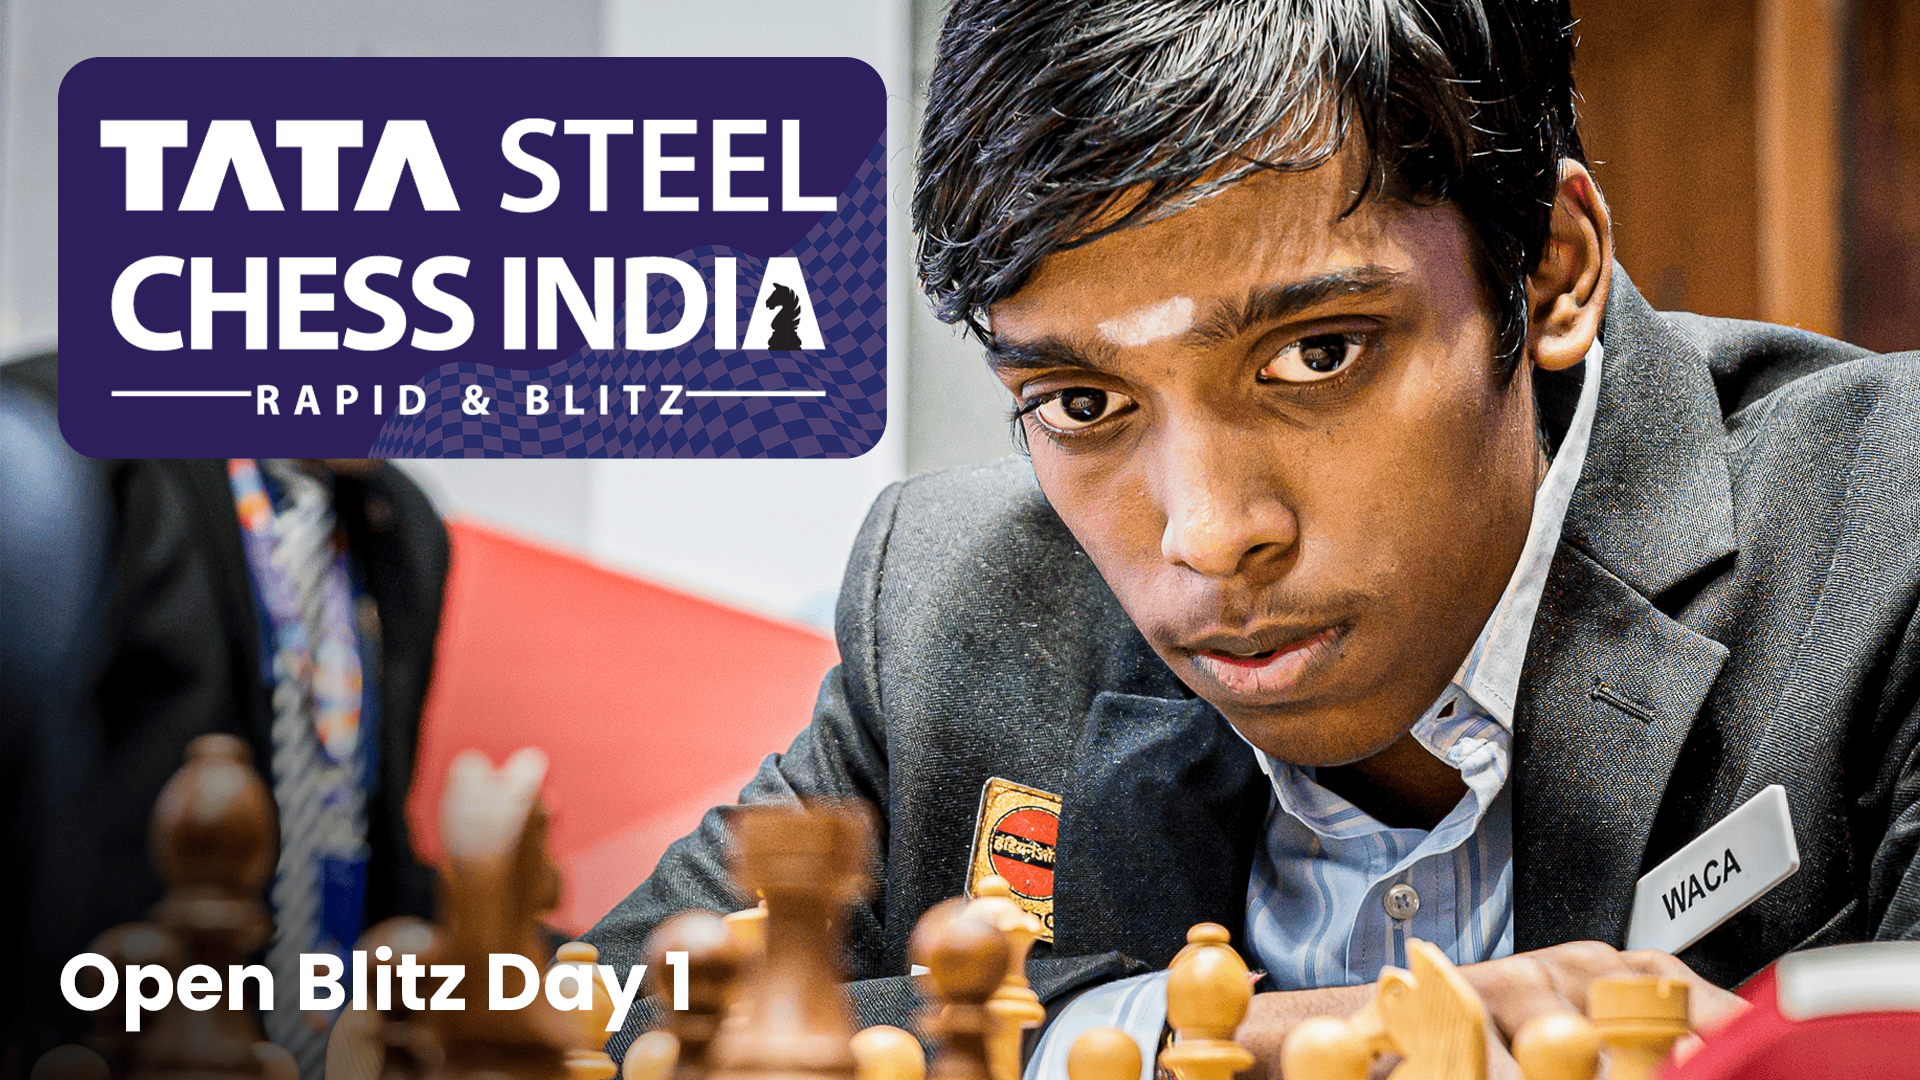 Tata Steel Chess to kick off in less than a week